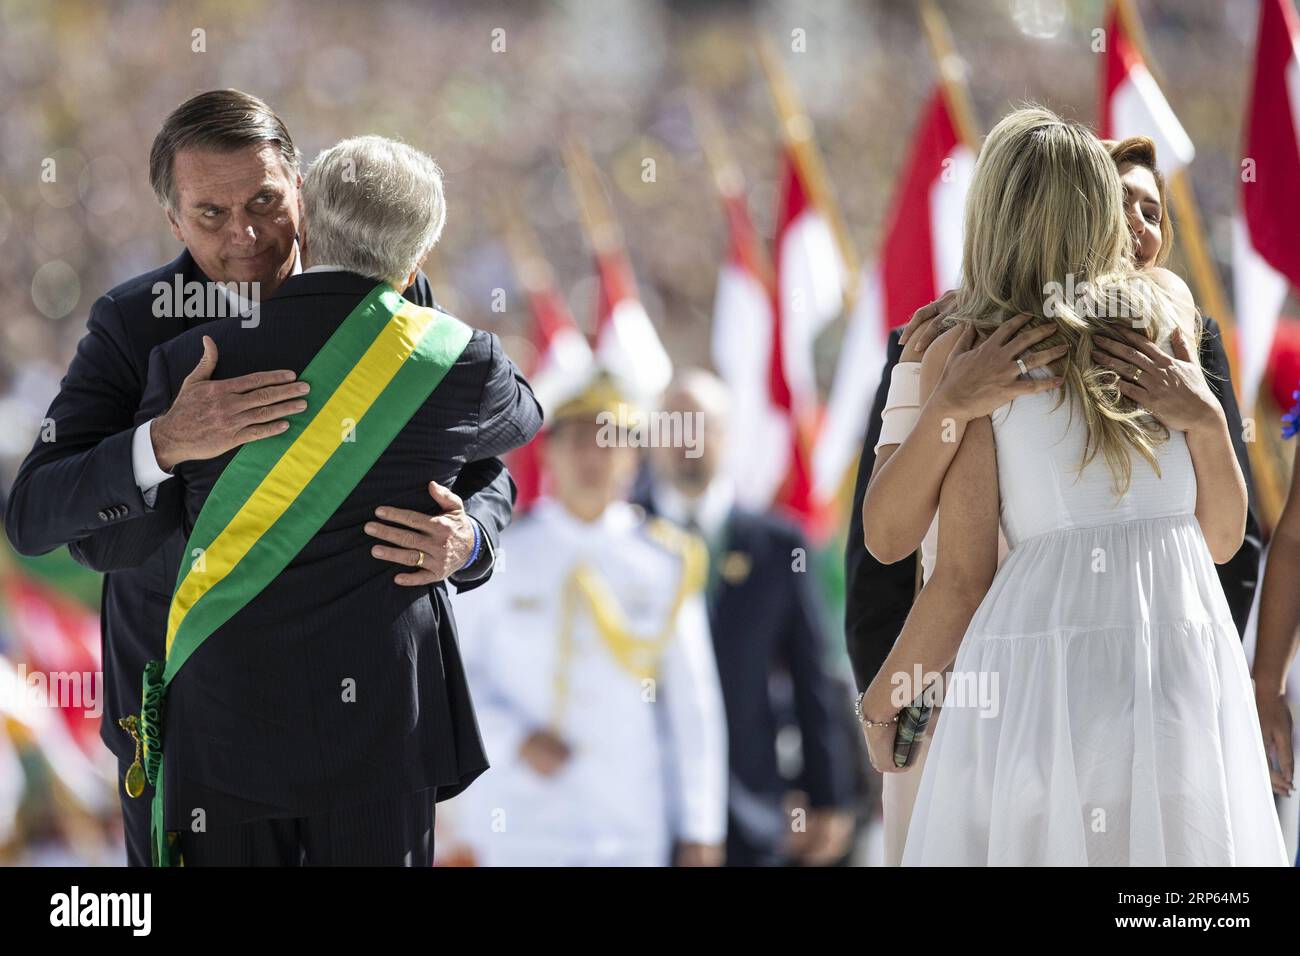 (190101) -- BRASILIA, Jan. 1, 2019 -- Jair Bolsonaro (1st L) embraces Brazil s outgoing President Michel Temer (2nd L) as Jair Bolsonaro s wife Michelle Bolsonaro (1st R) embraces Michel Temer s wife Marcela Temer (2nd R) during the inauguration ceremony in Brasilia, capital of Brazil, on Jan. 1, 2019. Army captain-turned-politician Jair Bolsonaro was sworn in as Brazil s president on Tuesday amid heightened security. ) BRAZIL-BRASILIA-JAIR BOLSONARO-PRESIDENT-INAUGURATION LixMing PUBLICATIONxNOTxINxCHN Stock Photo